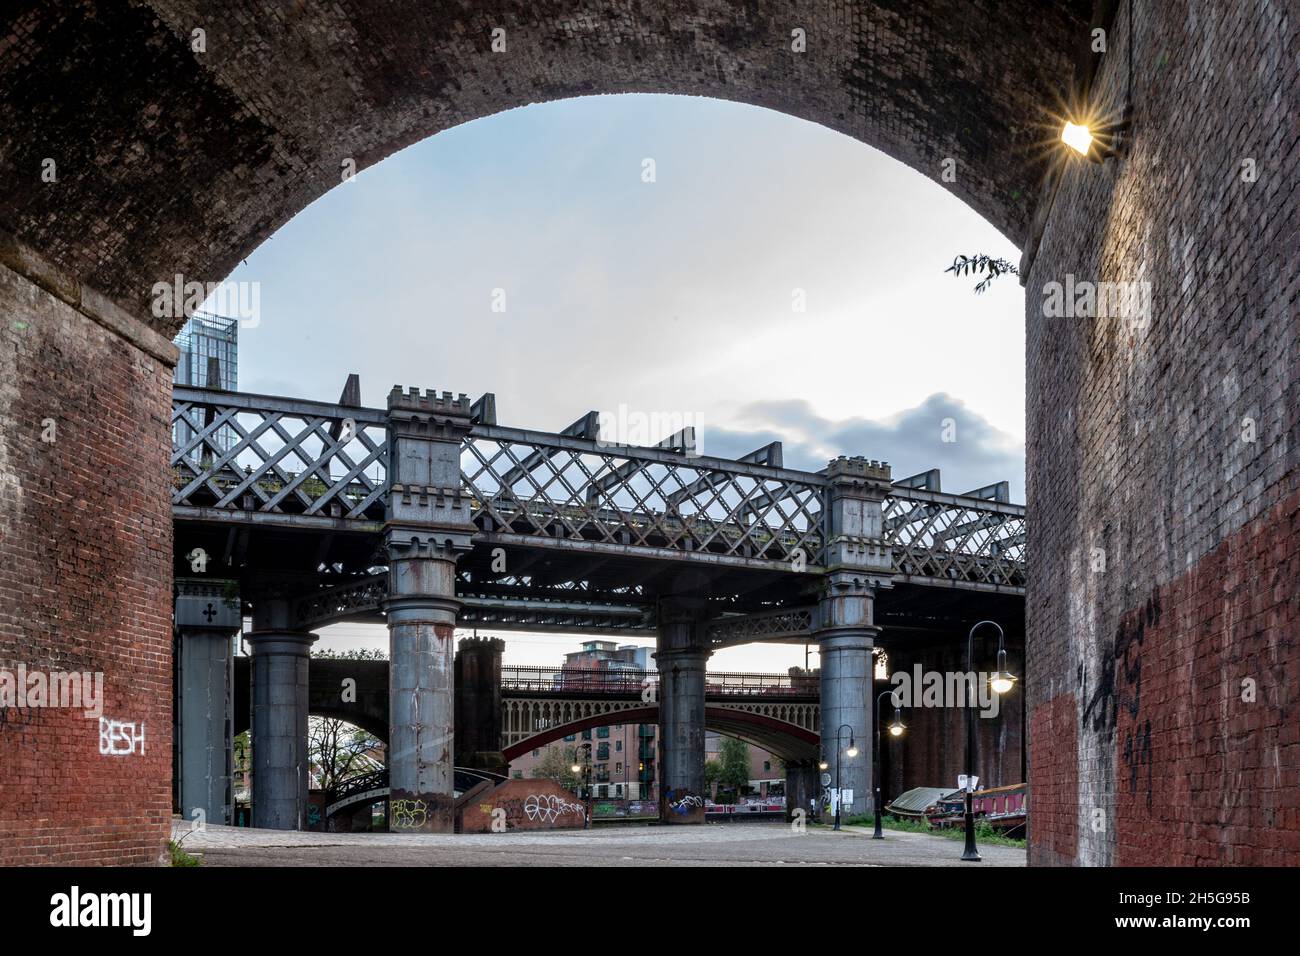 Castlefield urban heritage park bridges and viaducts made of steel, cast iron and brick dating back to the industrial revolution years.  Deansgate, Ma Stock Photo